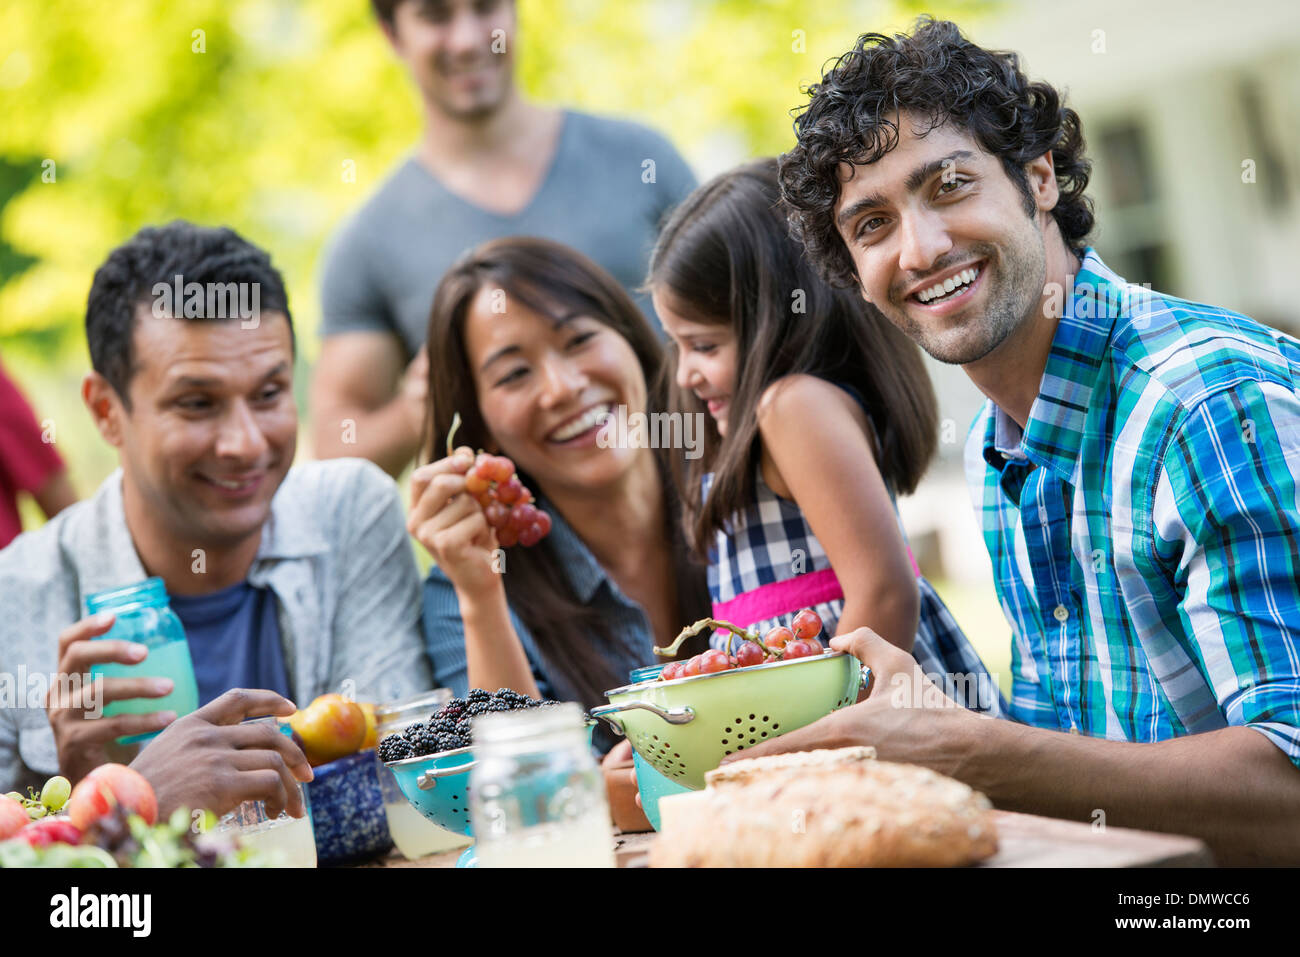 Adults and children around a table in a garden. Stock Photo